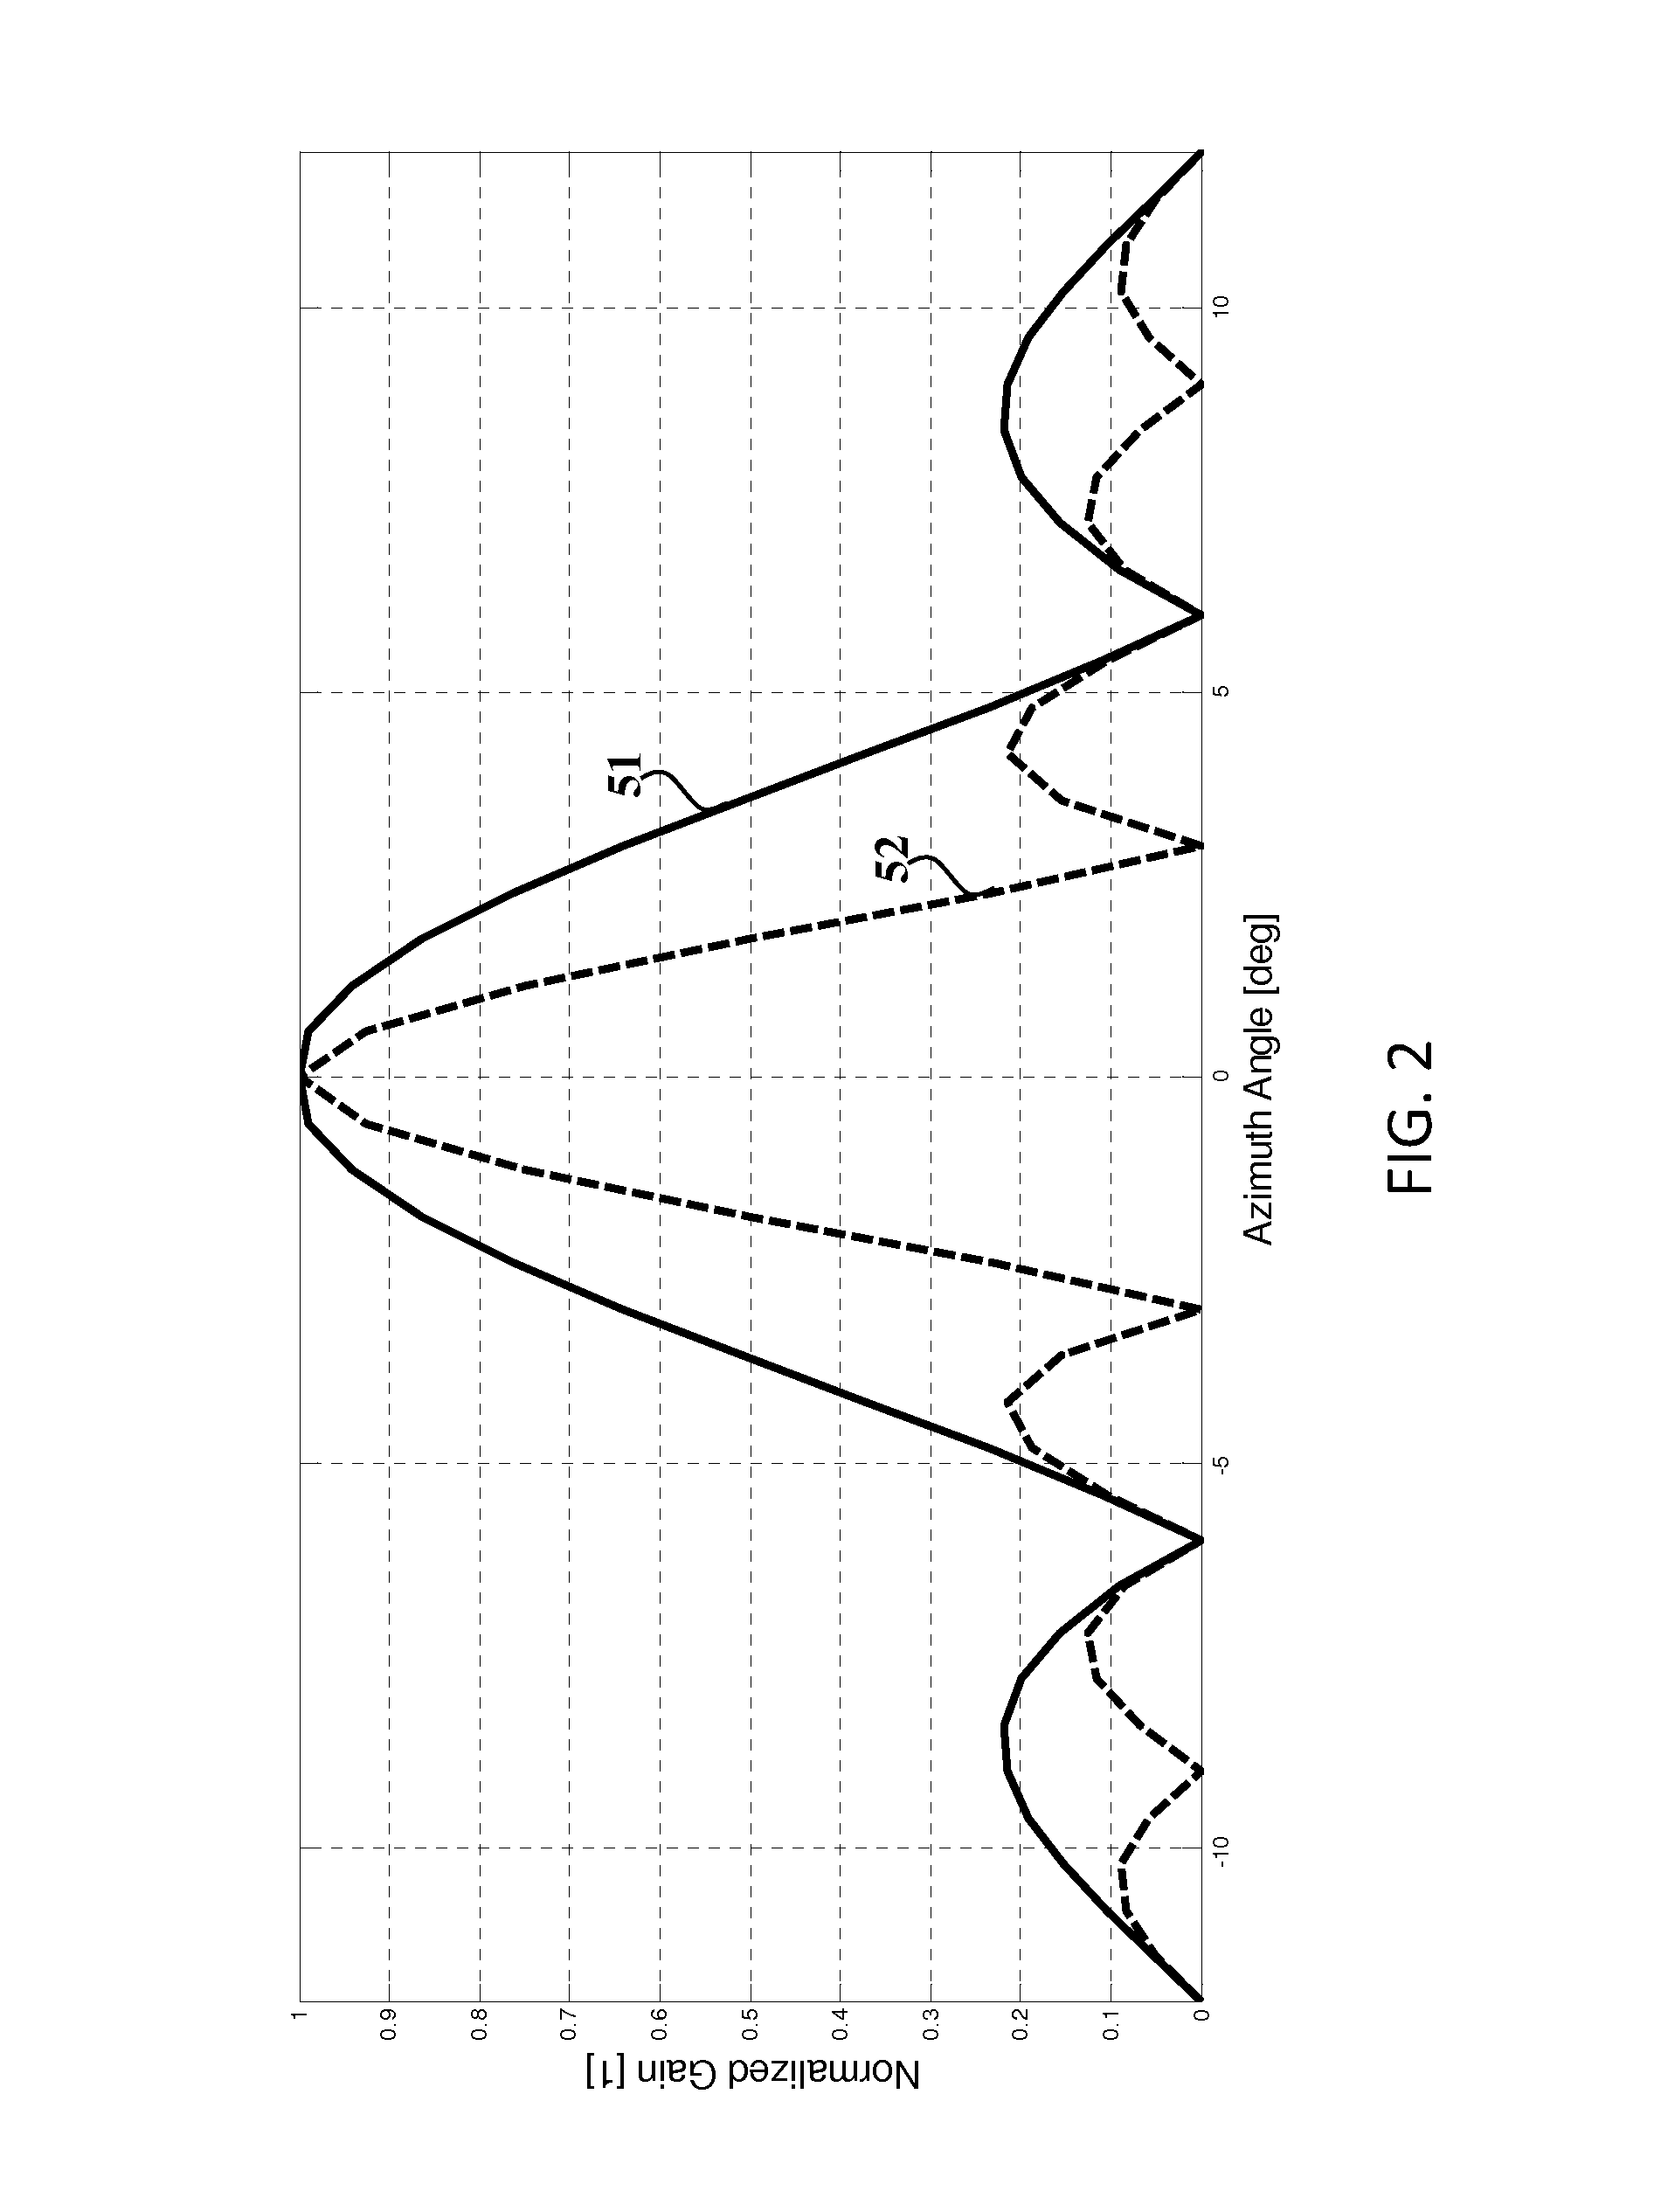 Clutter suppression in ultrasonic imaging systems